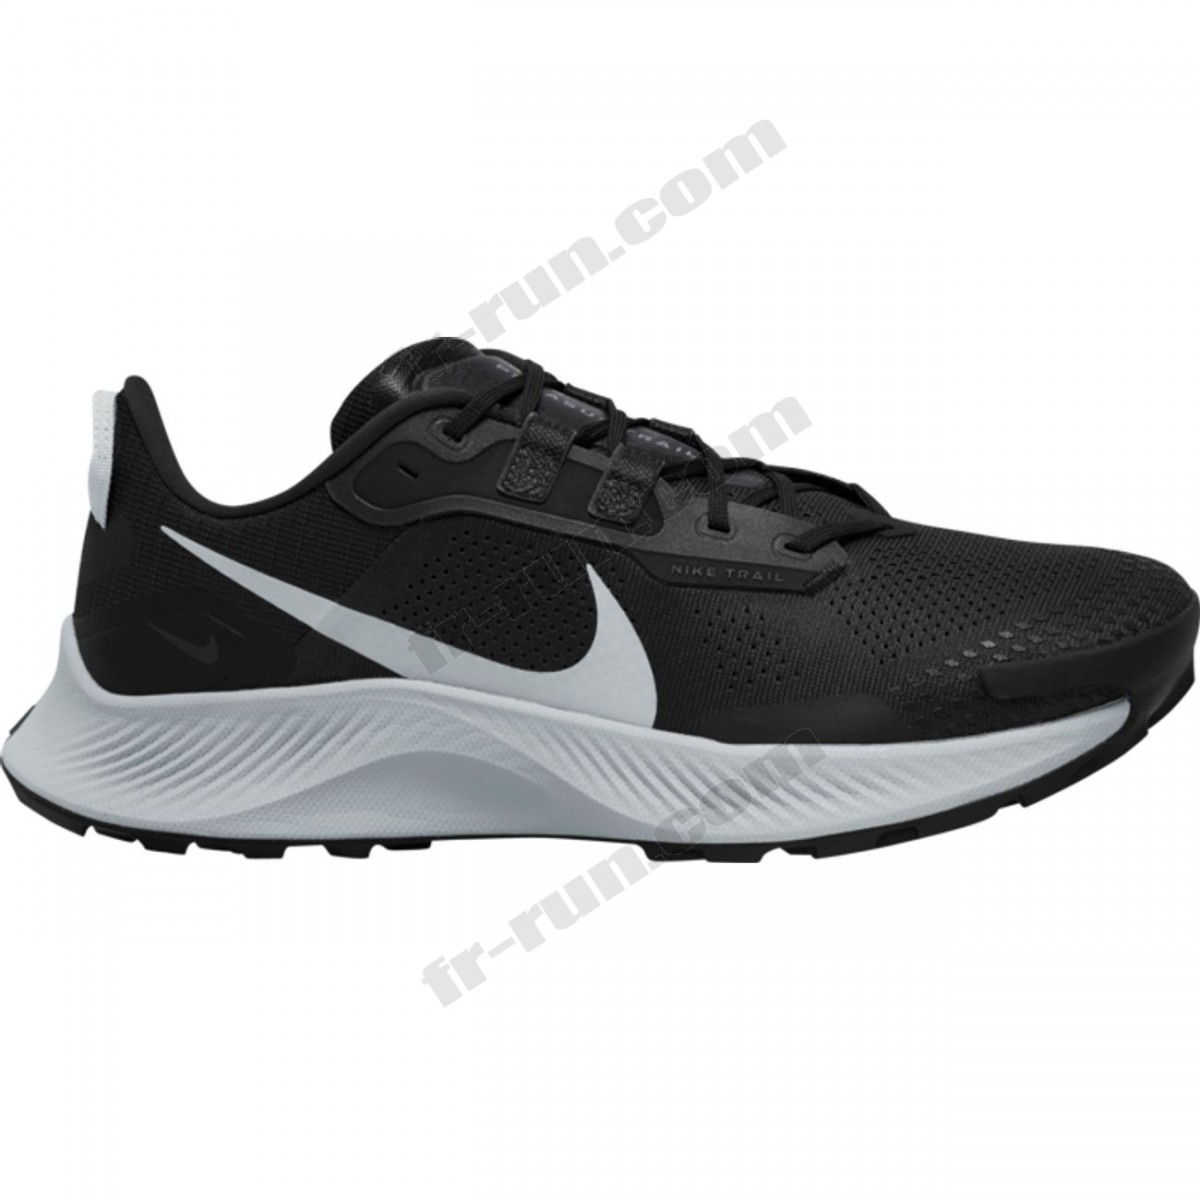 Nike/CHAUSSURES BASSES Trail homme NIKE NIKE PEGASUS TRAIL 3 √ Nouveau style √ Soldes - Nike/CHAUSSURES BASSES Trail homme NIKE NIKE PEGASUS TRAIL 3 √ Nouveau style √ Soldes